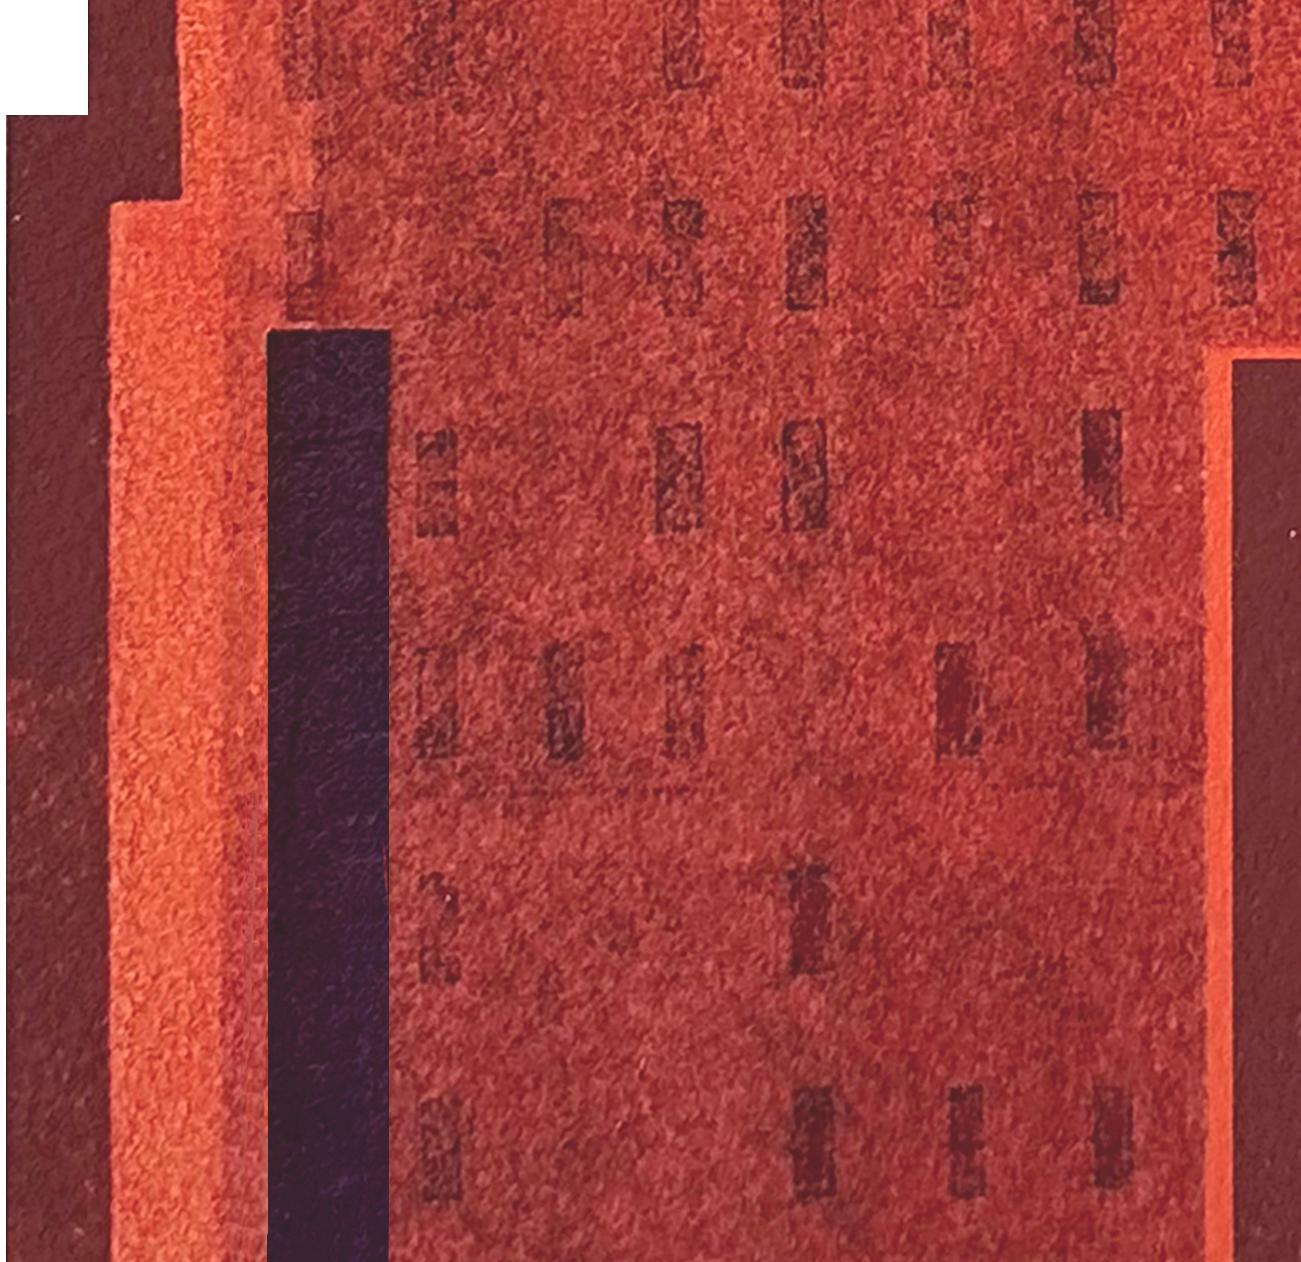 Building VI: modernist city architecture collage on monoprint in red, unframed - Abstract Print by Agathe Bouton